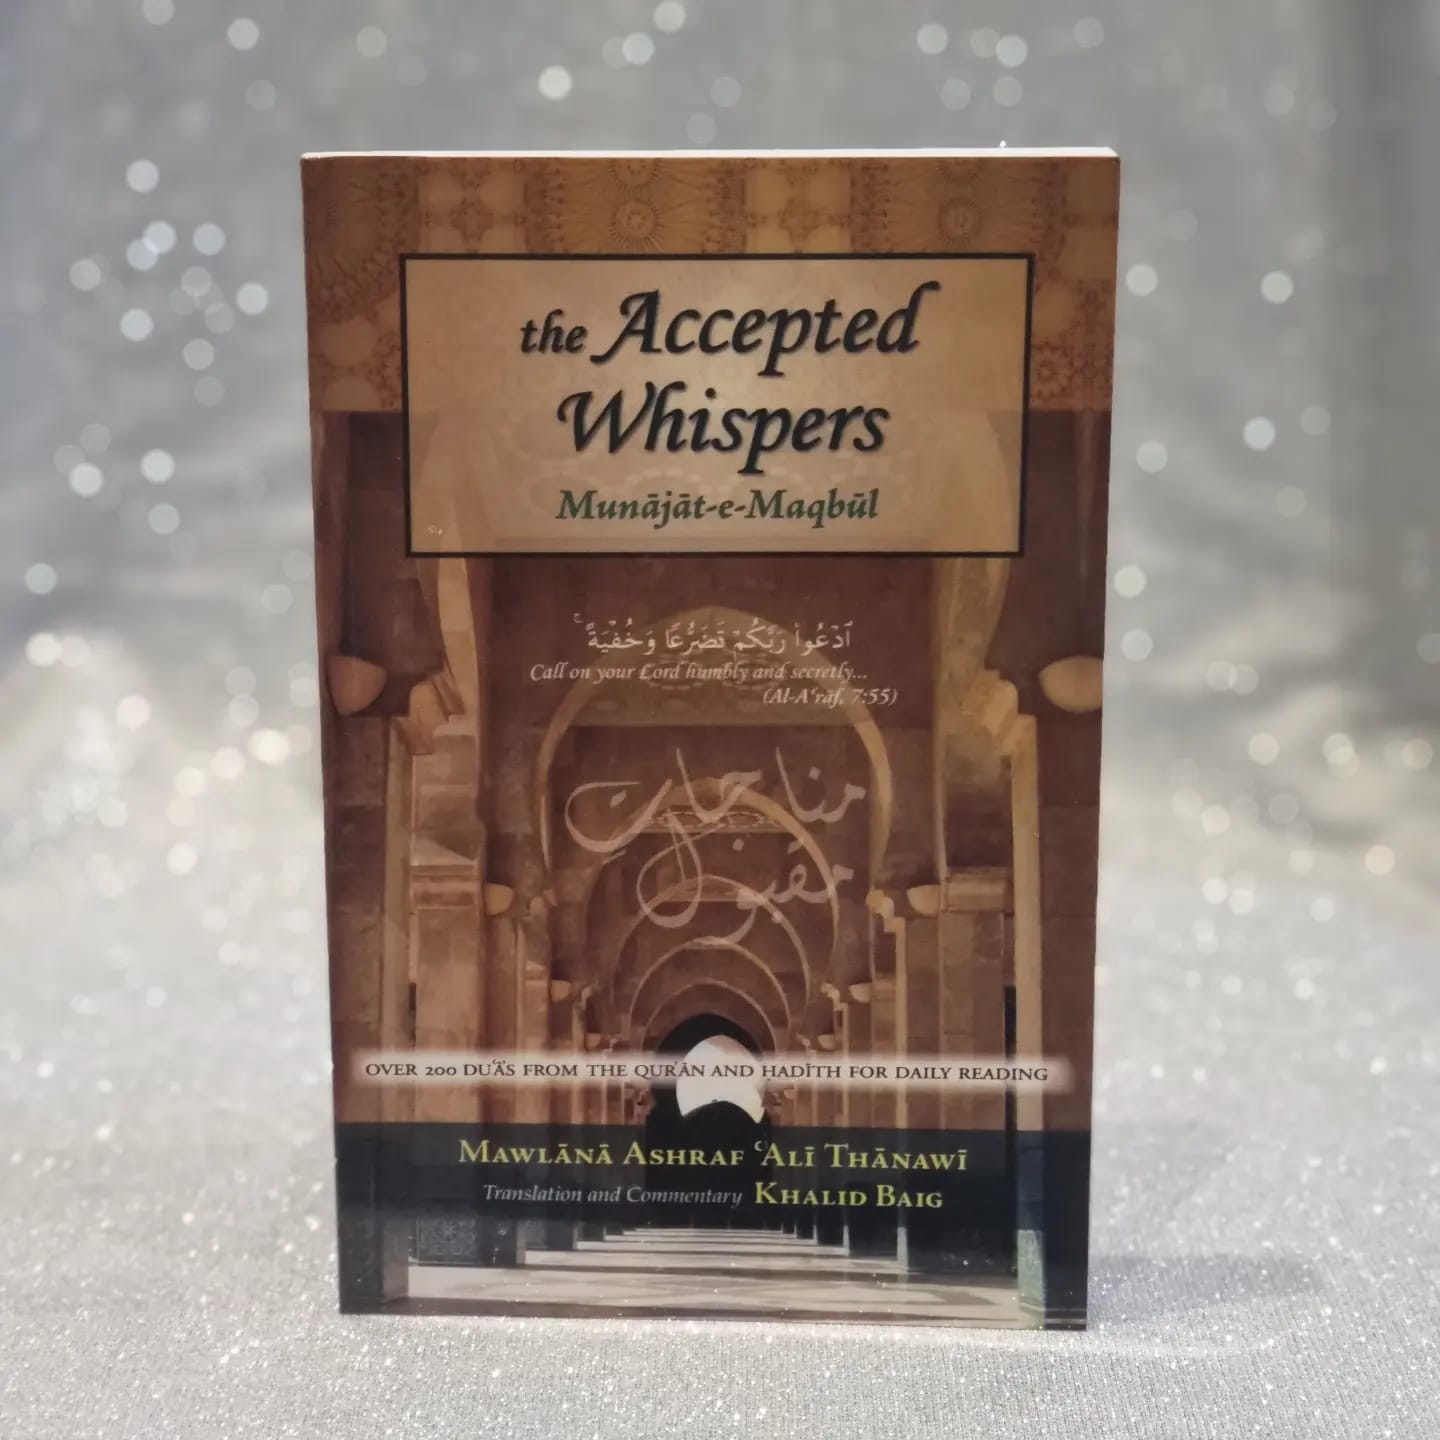 The Accepted Whispers Munajat-e-Maqbul